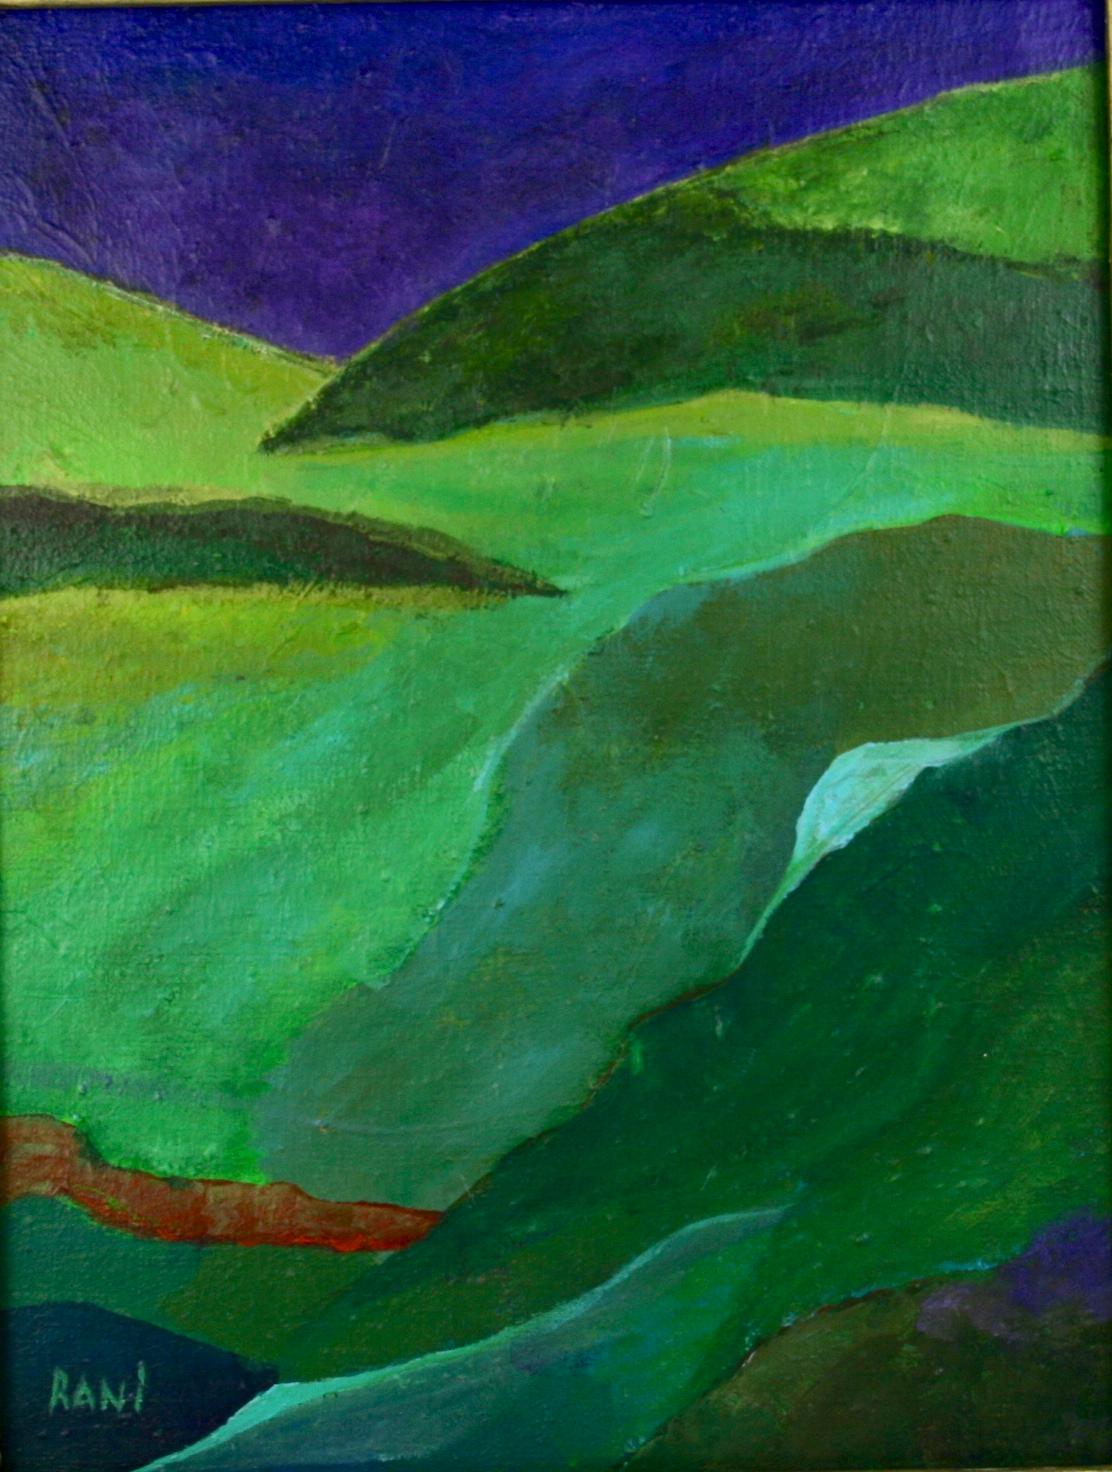 Modern American Abstract Landscape - Painting by Rani